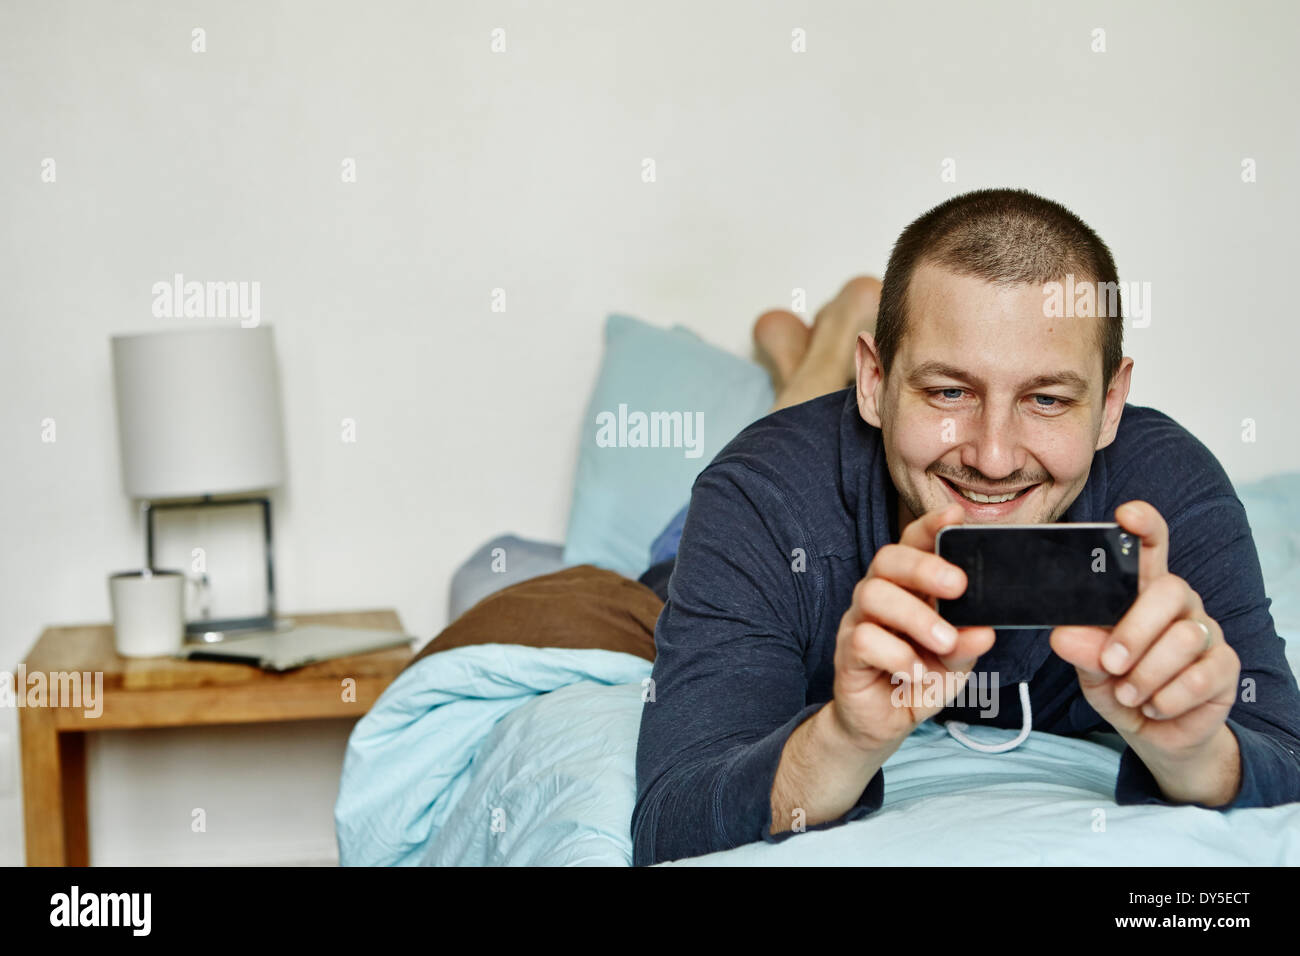 Mid adult man lying on bed taking self portrait on cellphone Stock Photo